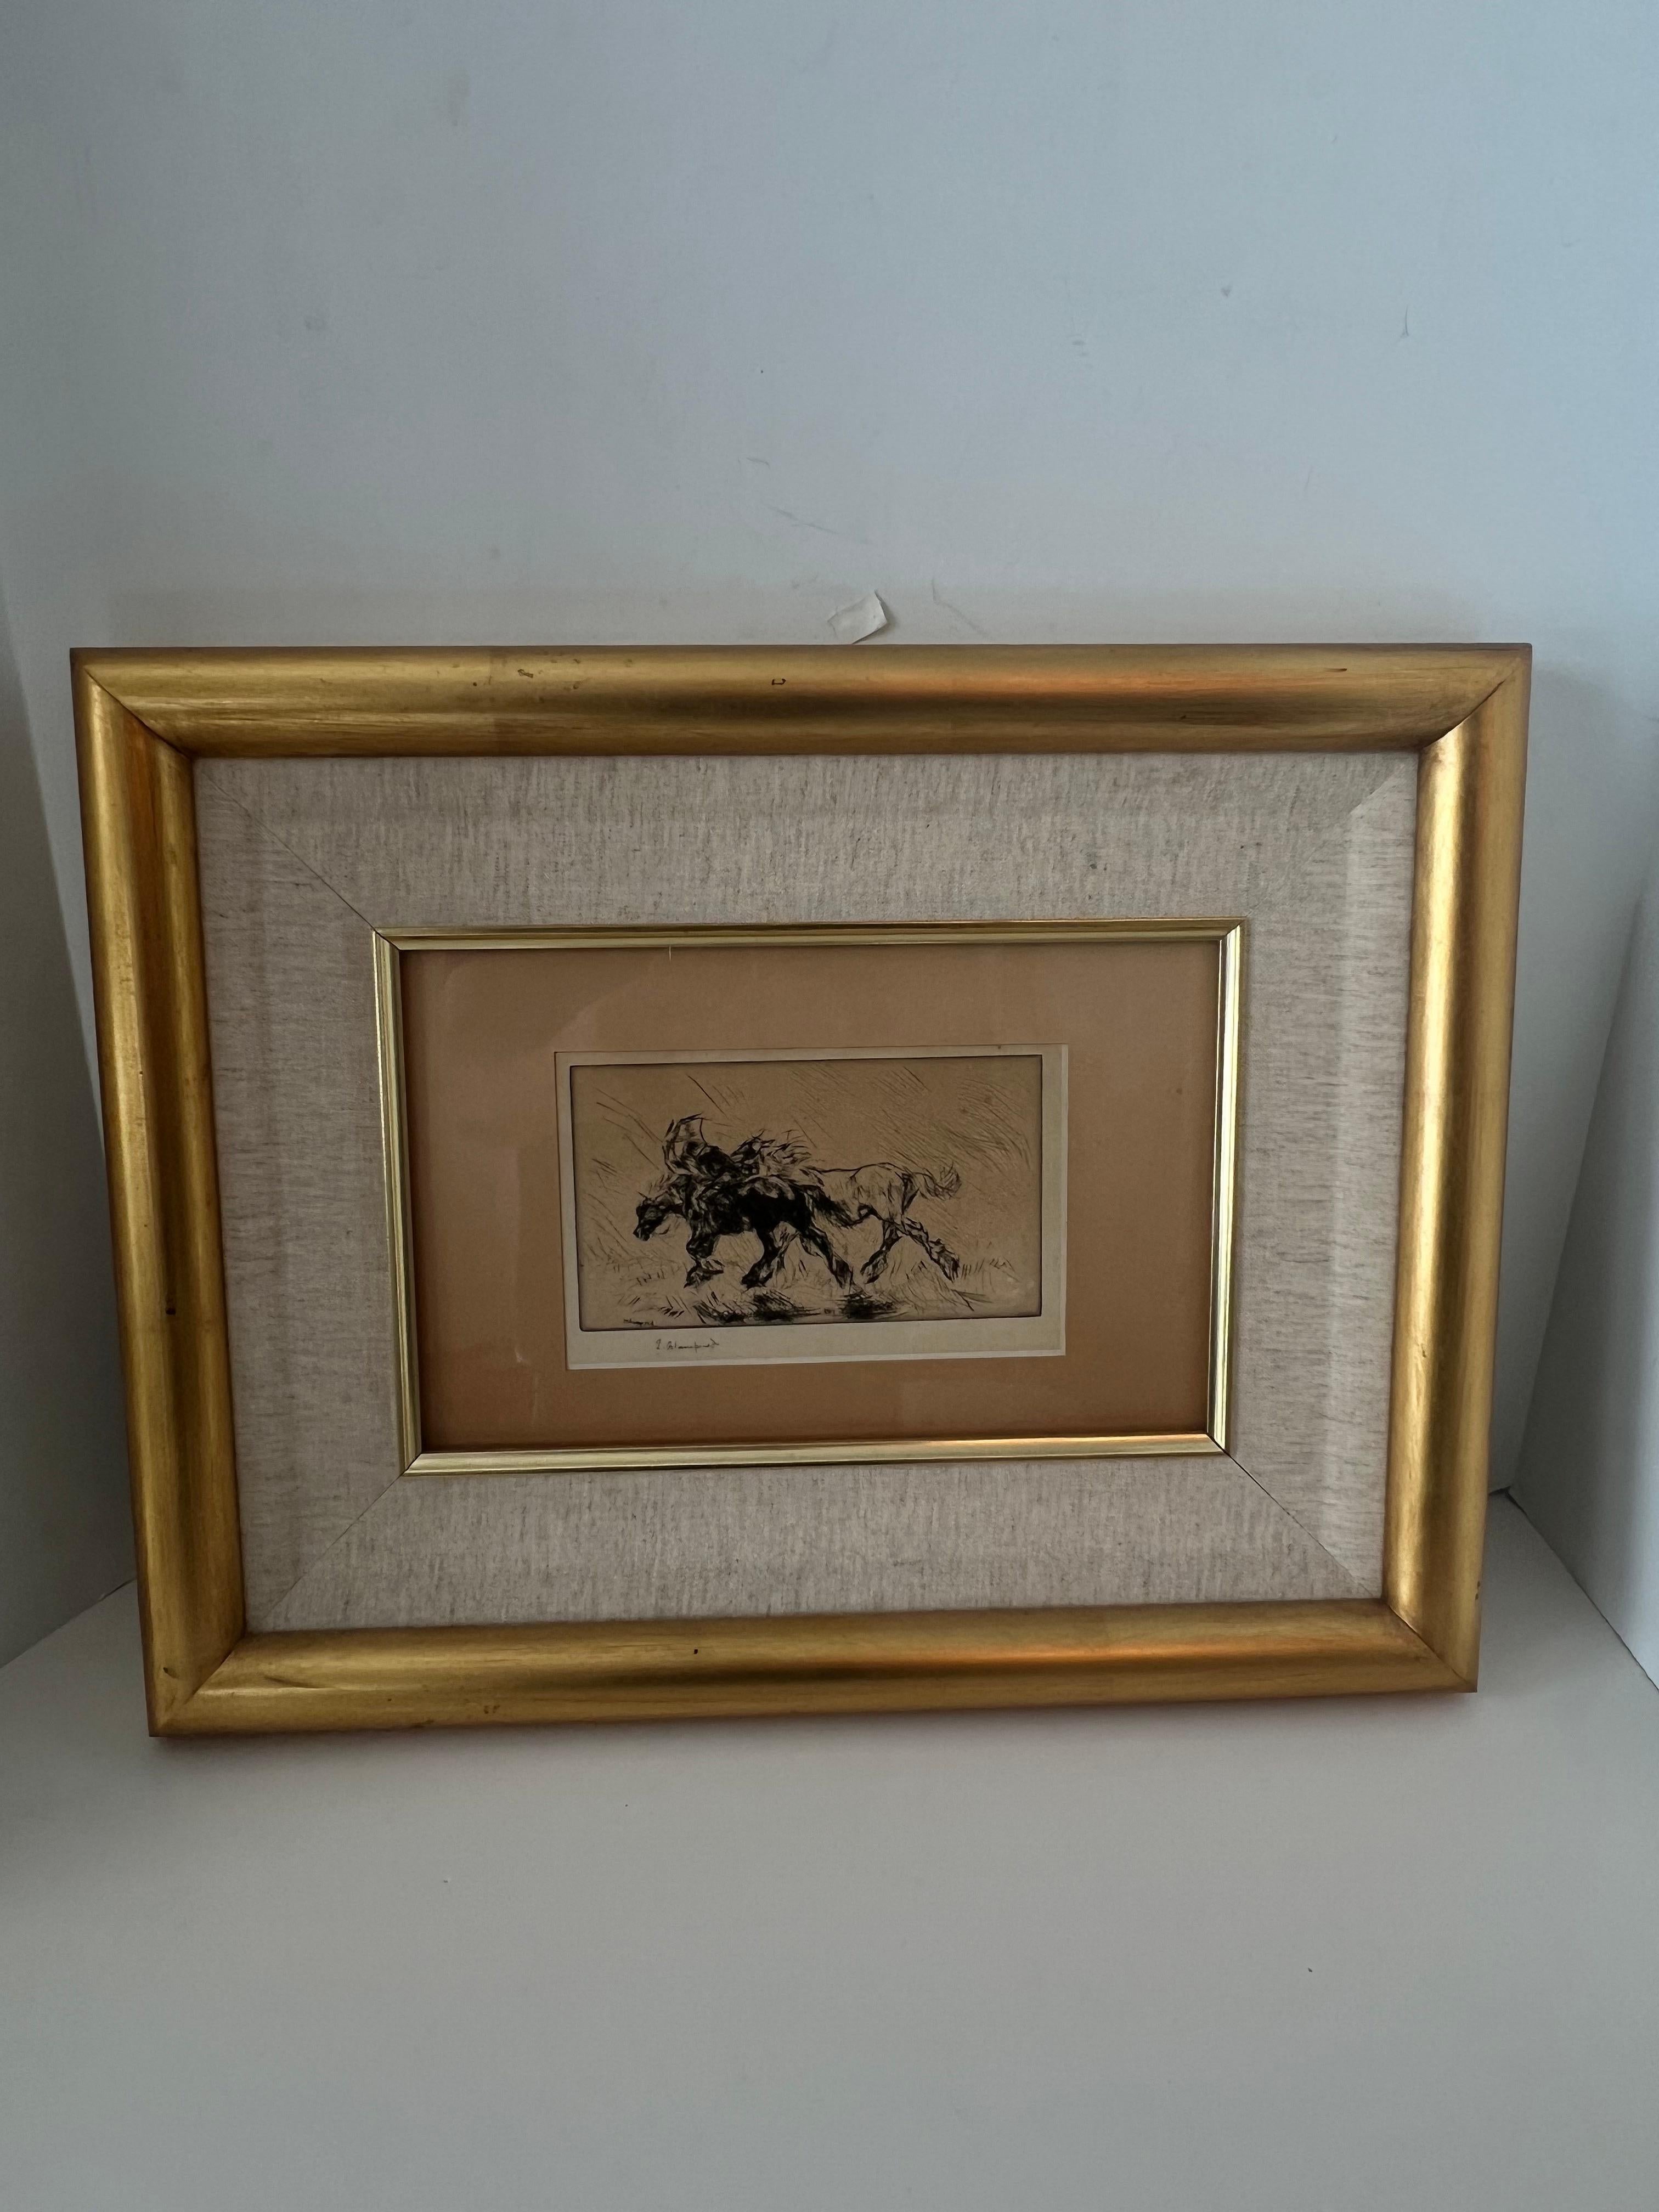  	Edmund Blampied Pen Drawing of a Horse Matted and Framed in Gilt Frame For Sale 5